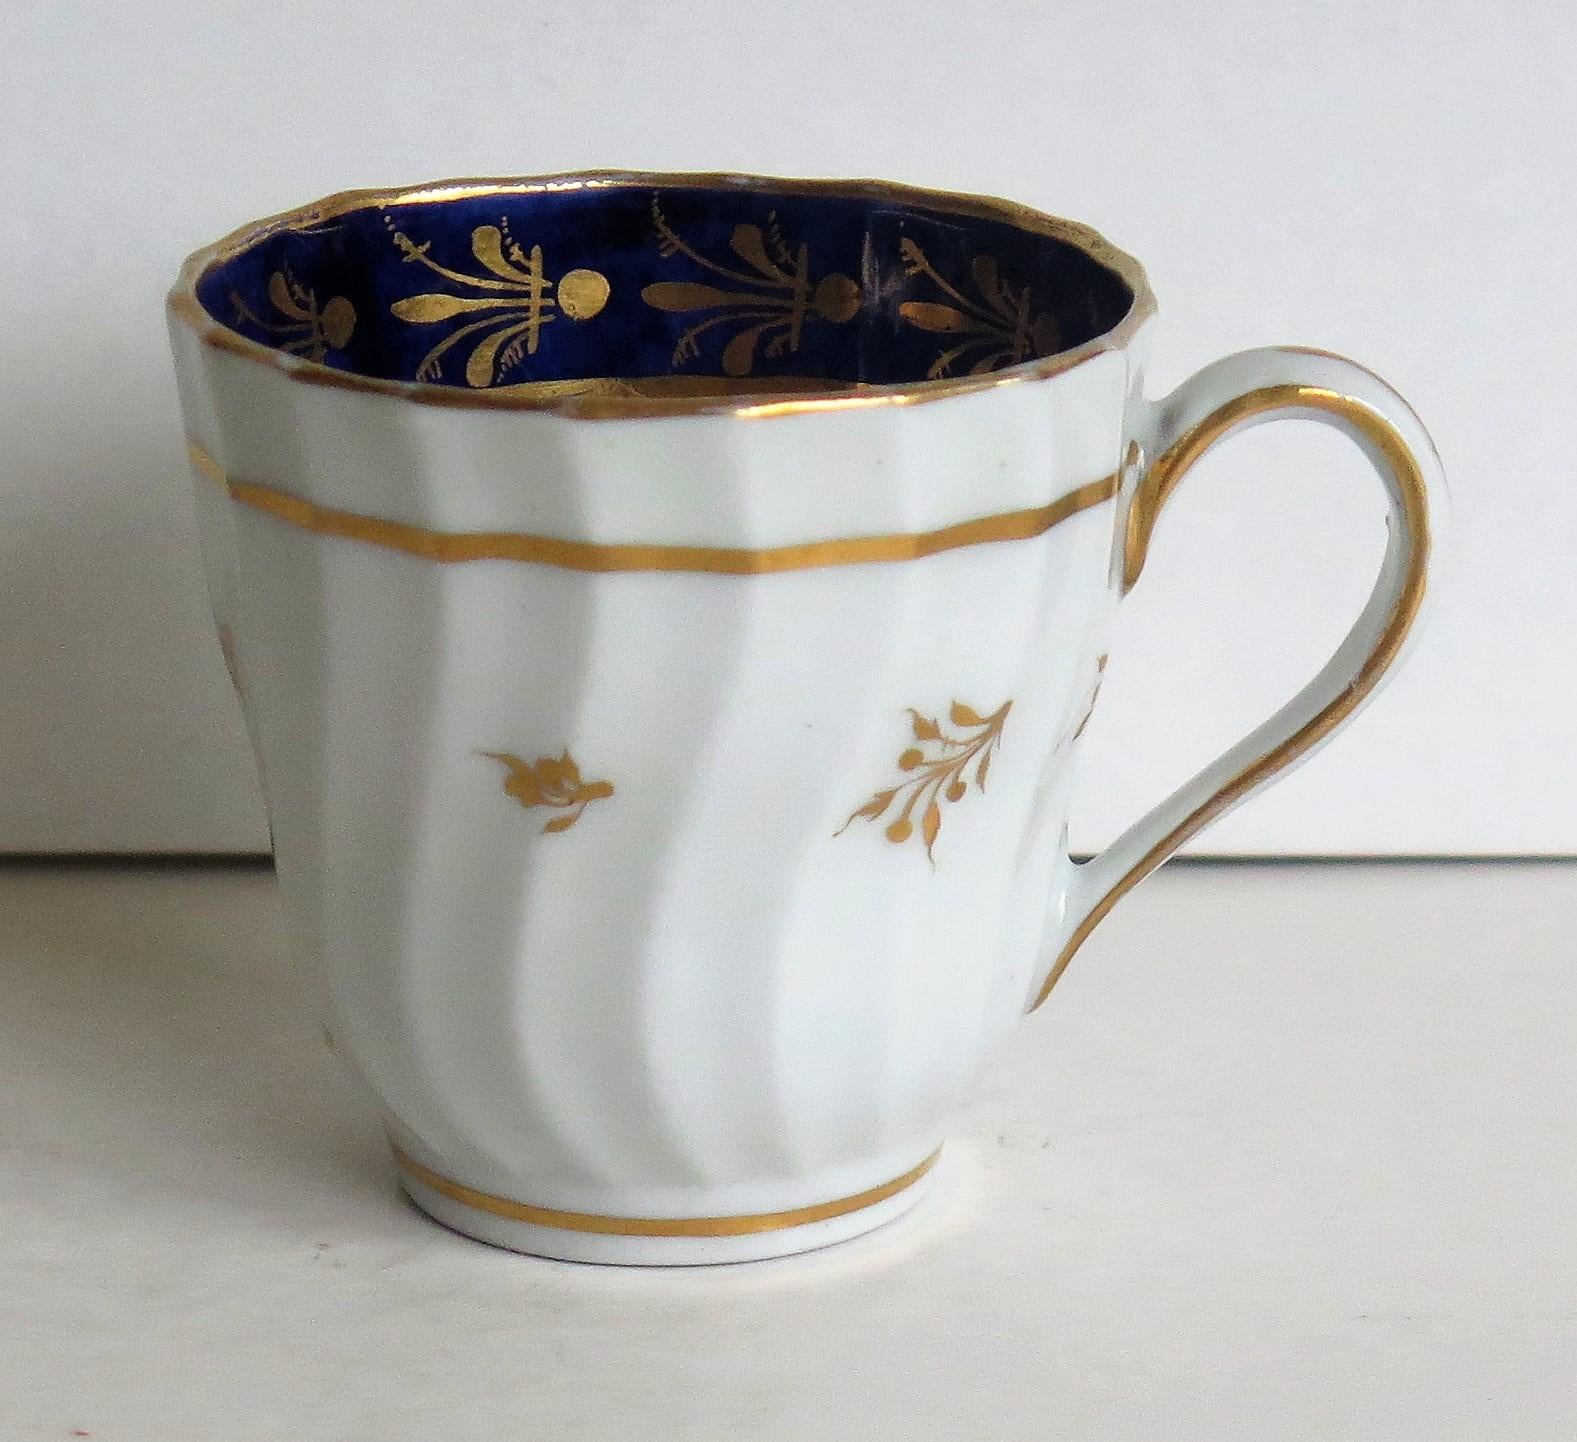 This is an early porcelain coffee cup with a shanked and Fluted Body that we attribute to the New Hall Porcelain Works of Shelton, Staffordshire, England, made, circa 1795.

The cup sits on a low foot and has a slightly waisted body which has